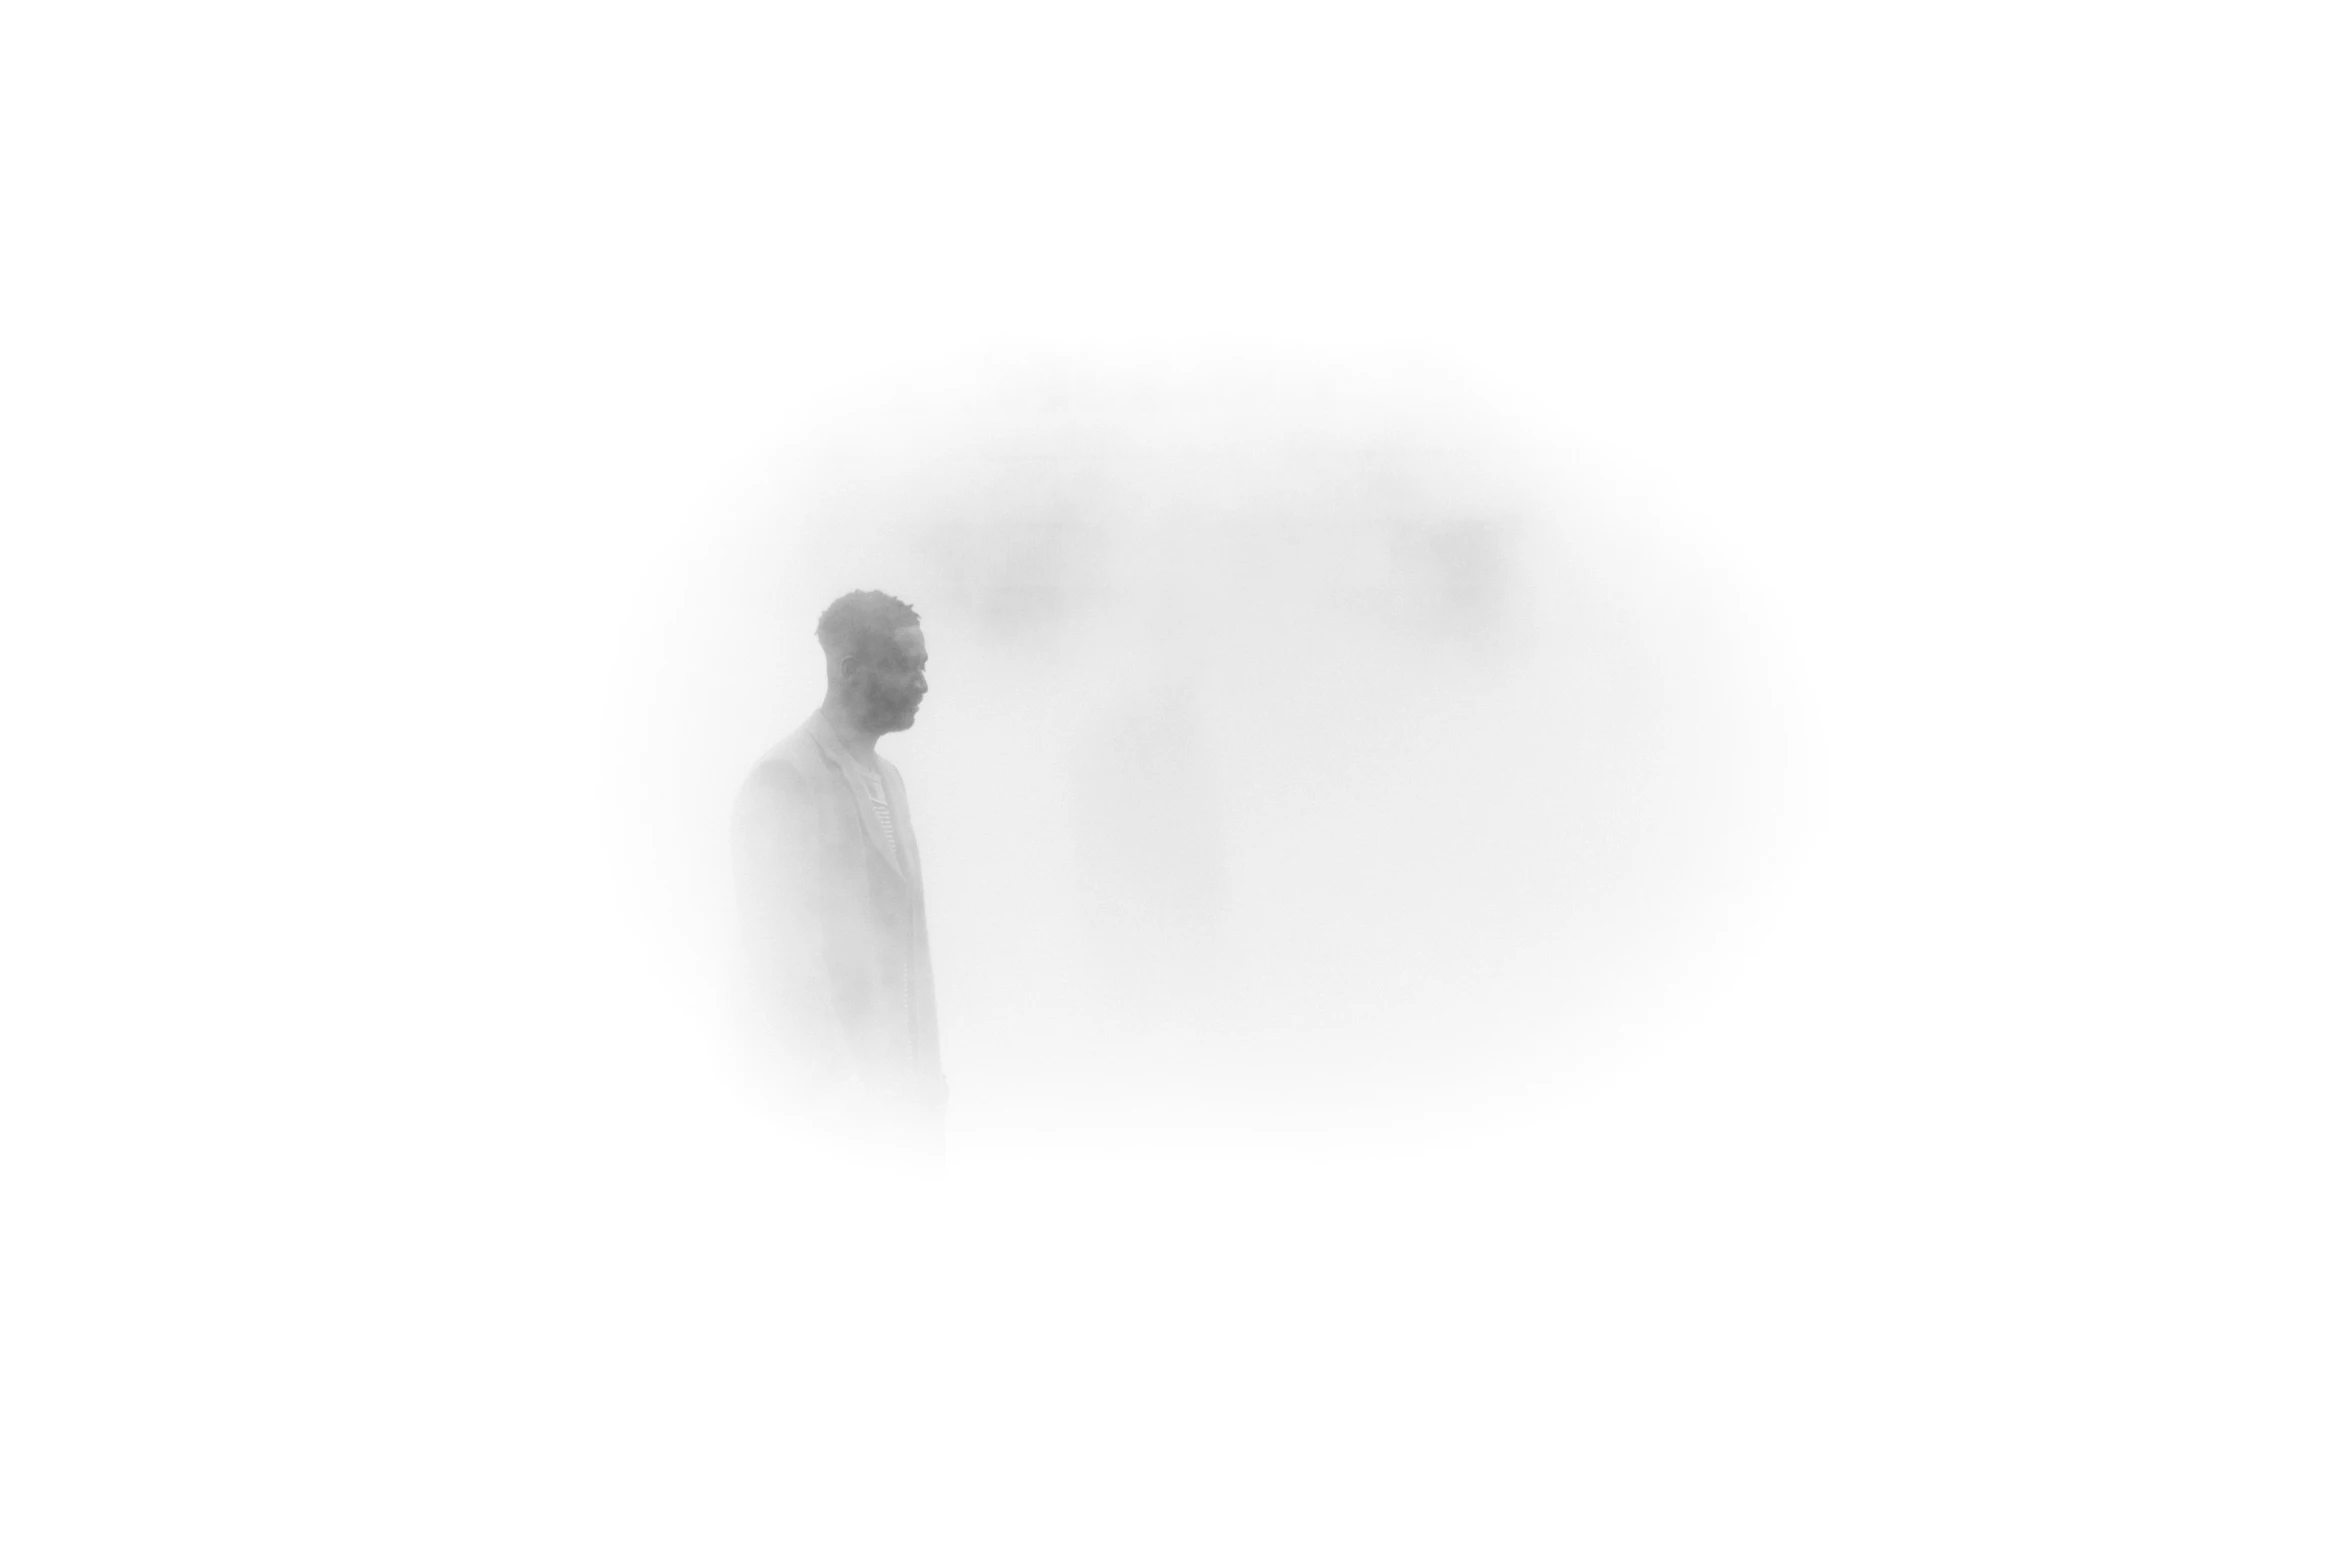 a silhouette of a man standing in the fog with a cellphone